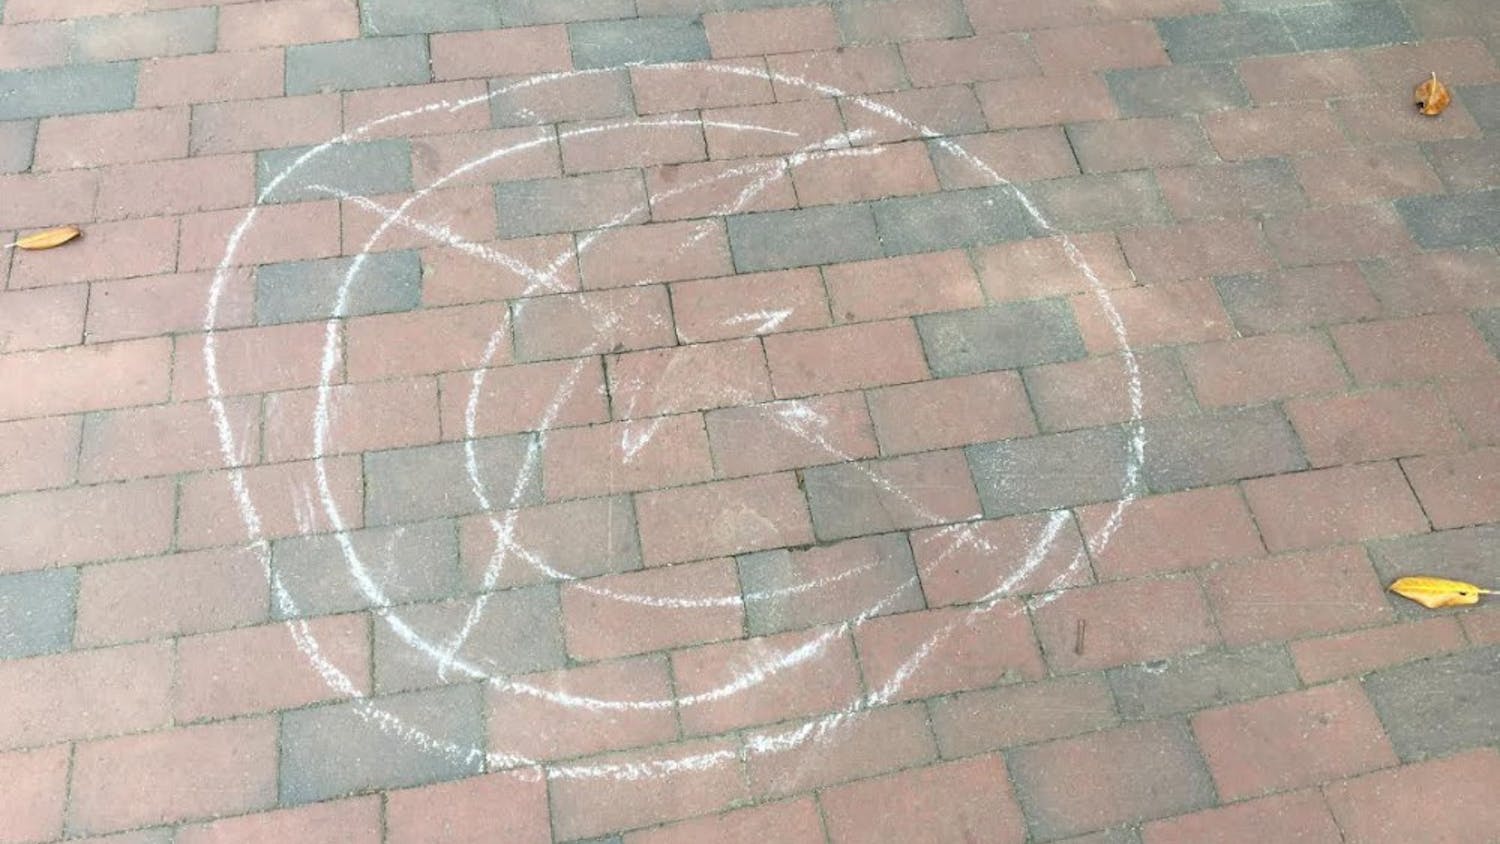 Chalk messages around campus depict the symbol of Islam with an “X” over it.